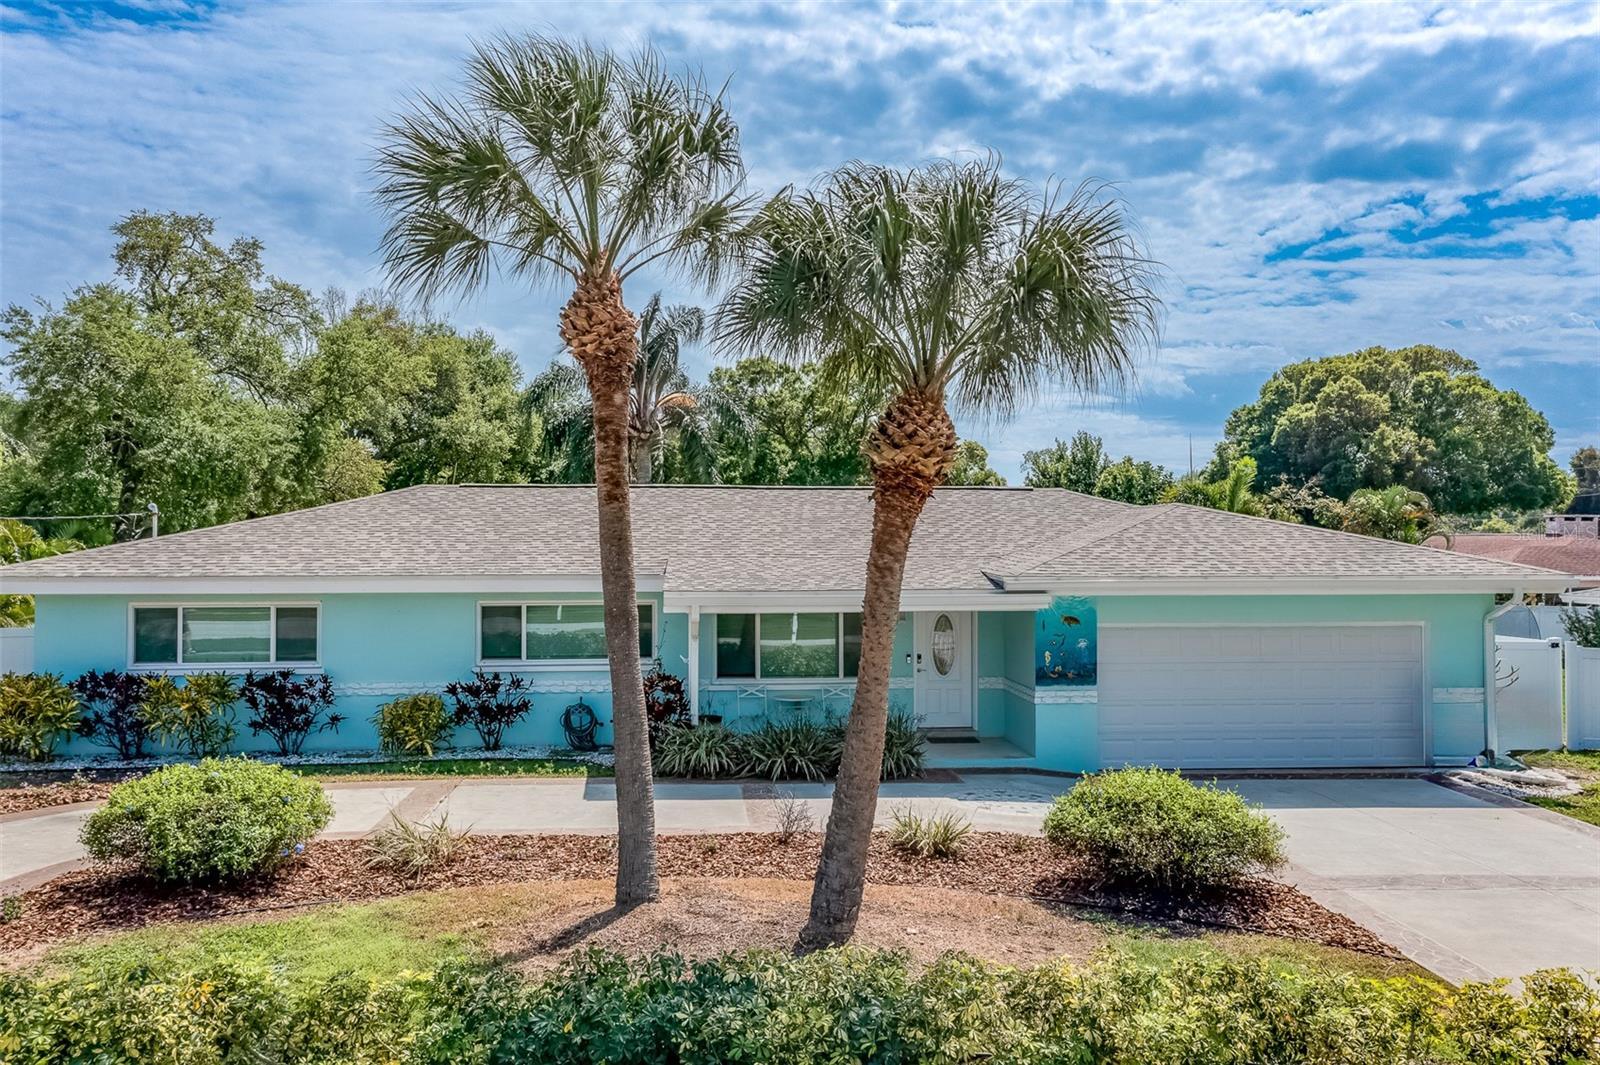 Photo one of 1715 Lakeview Rd Clearwater FL 33756 | MLS U8235793